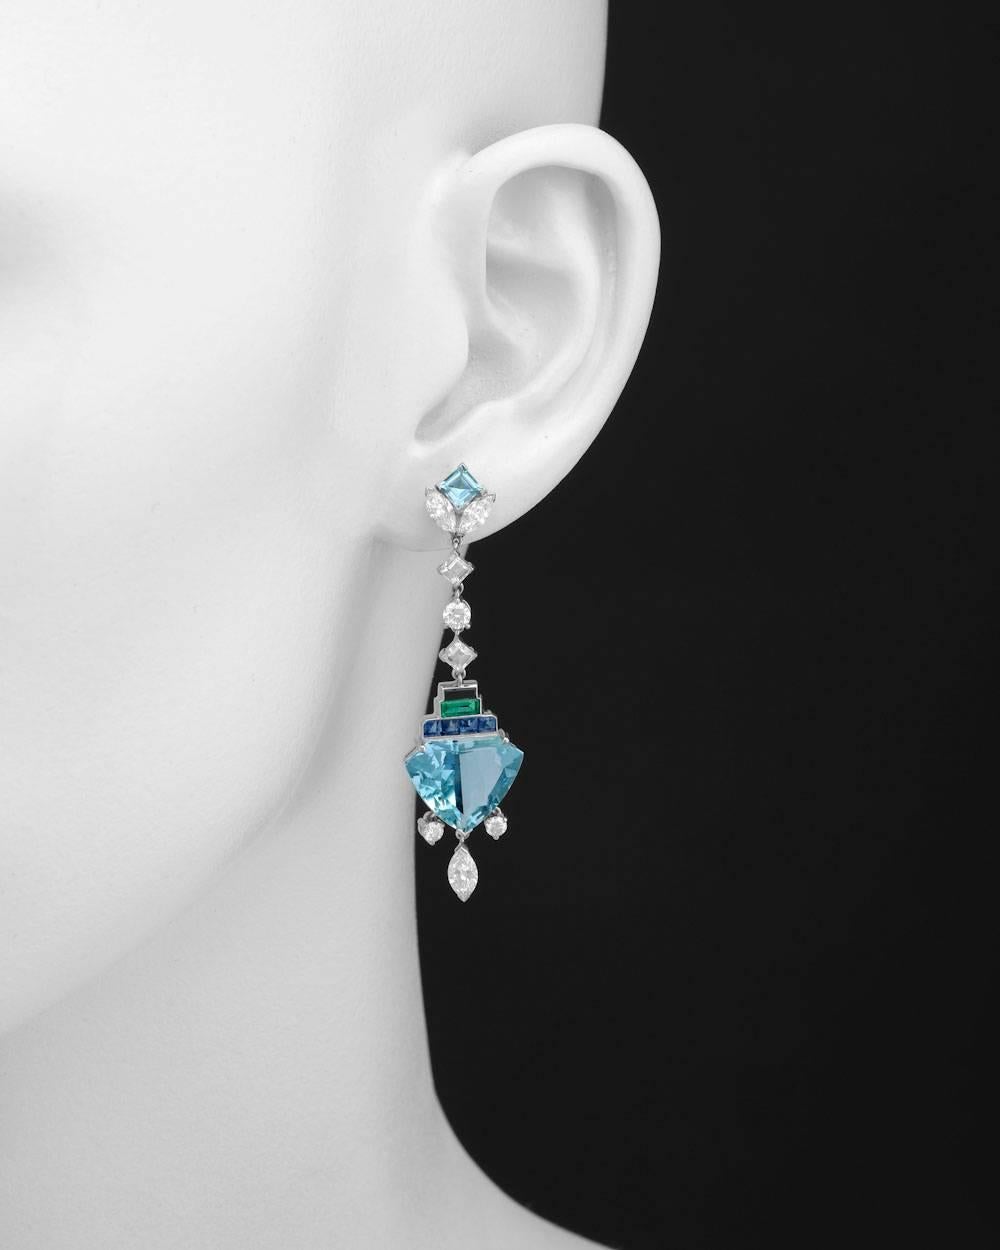 Multicolored gemstone and diamond long drop earrings, showcasing two fine shield-shaped aquamarines weighing 11.57 total carats, accented by sixteen marquise, square and round-cut diamonds altogether weighing 2.55 total carats, as well as eight